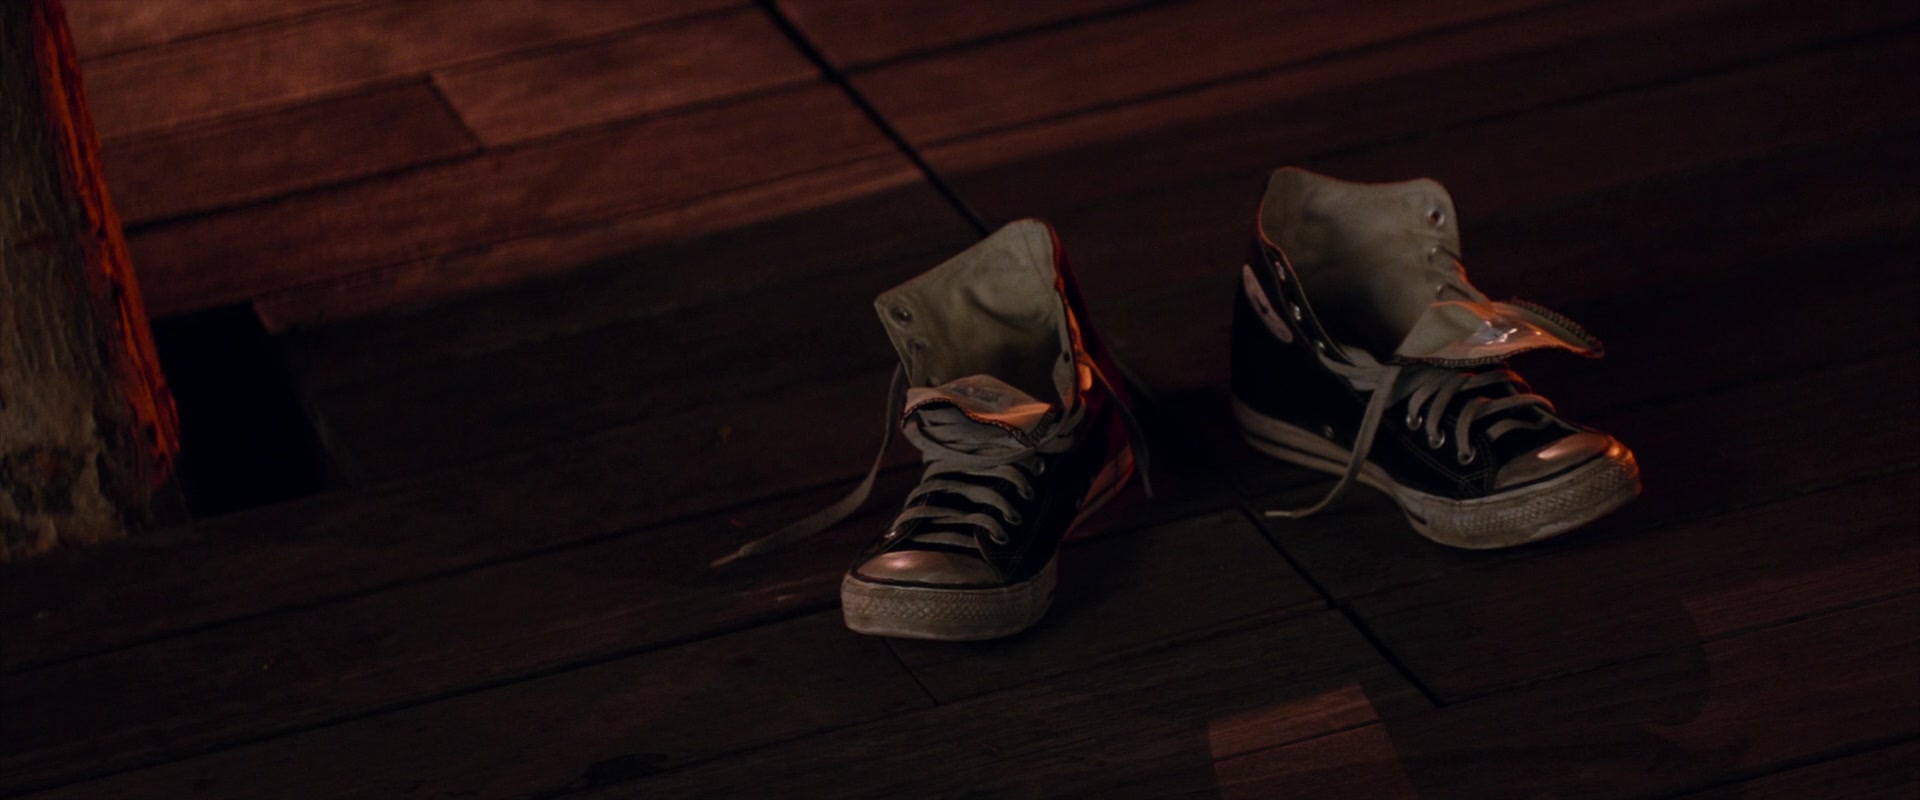 Converse HiTop Sneakers Of Andrew Garfield As Peter Parker In The Amazing  Spider-Man 2 (2014)